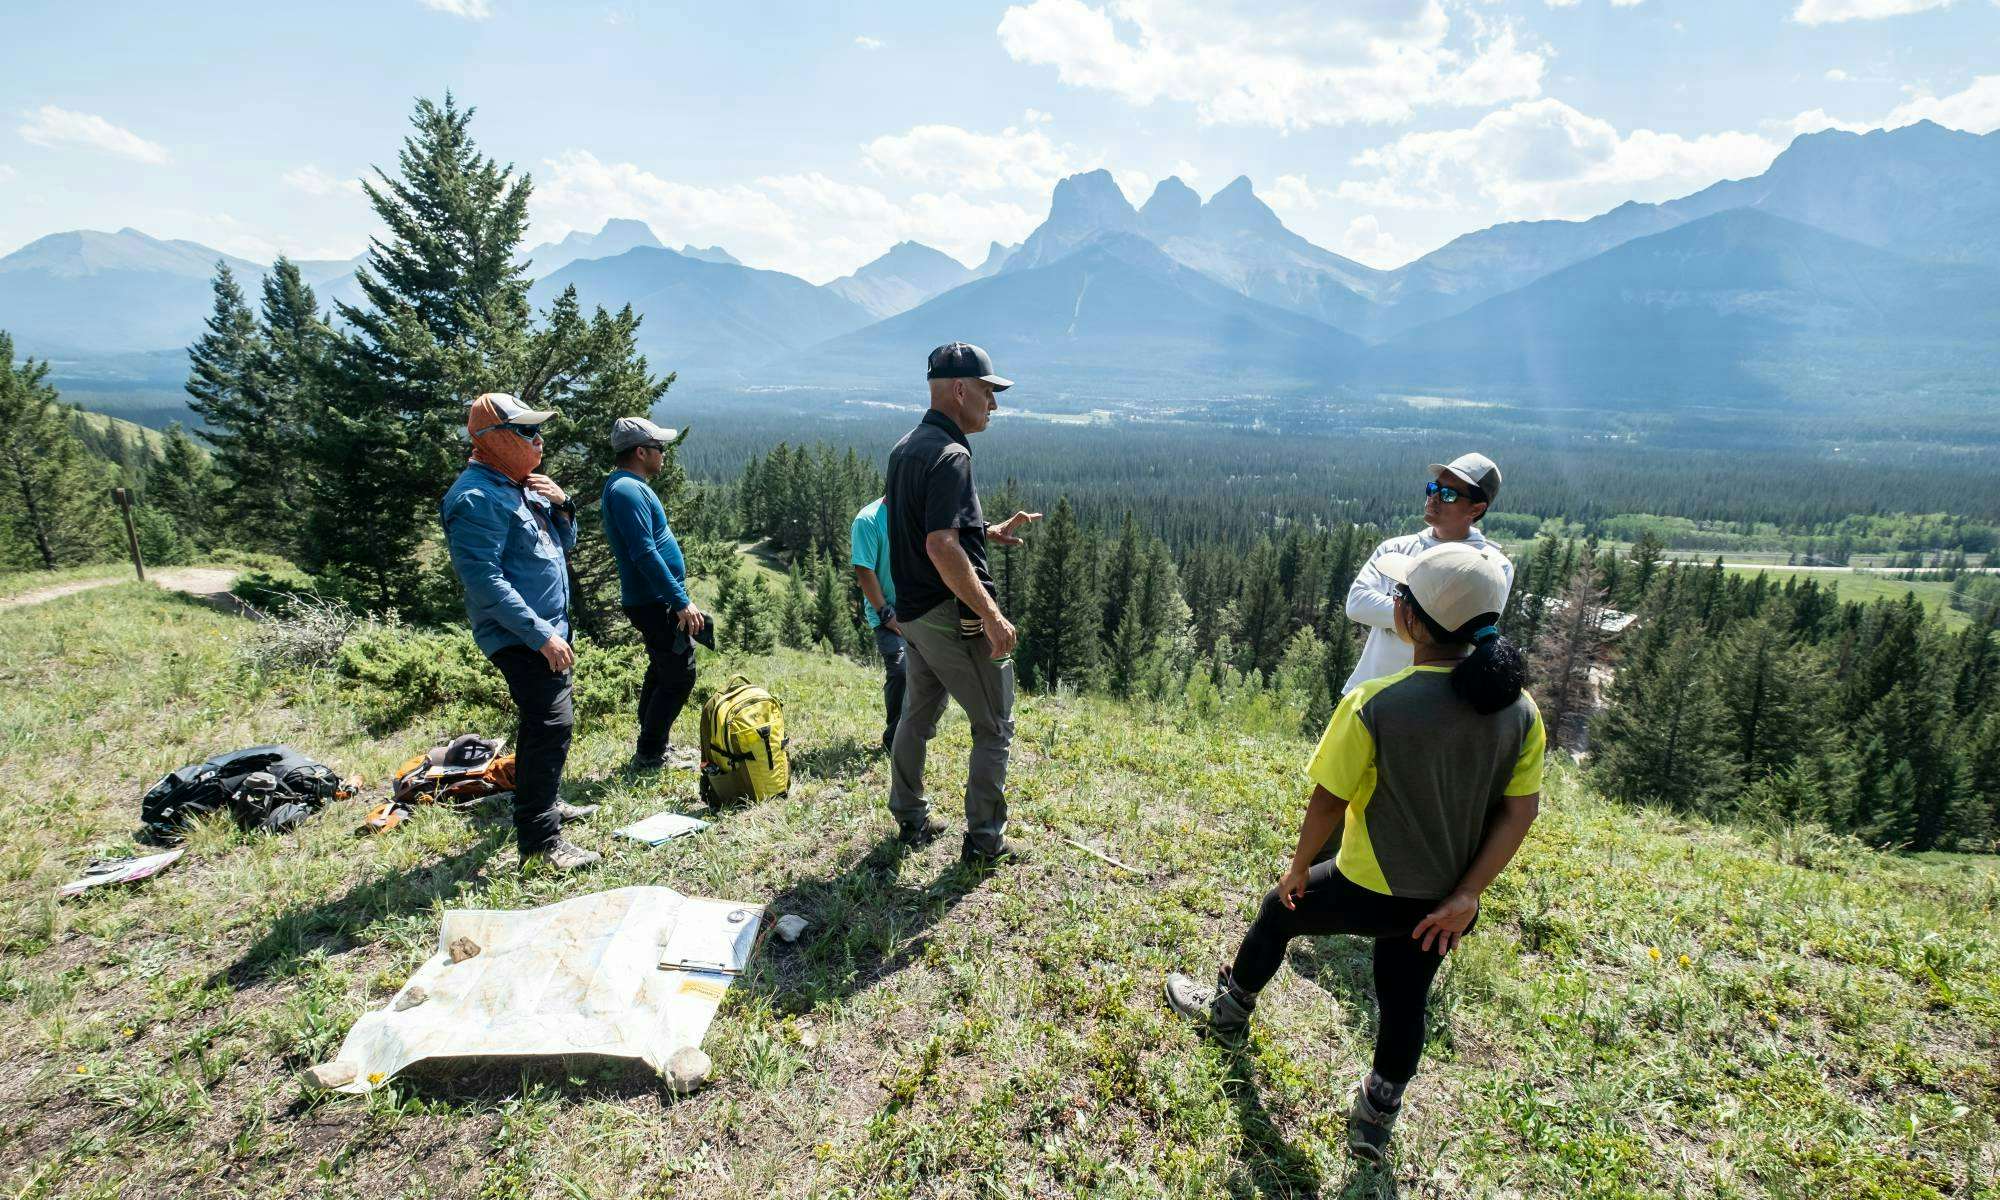 Photo: ACMG summer Adventure Access Program with the K8 Mountaineering Club of Alberta